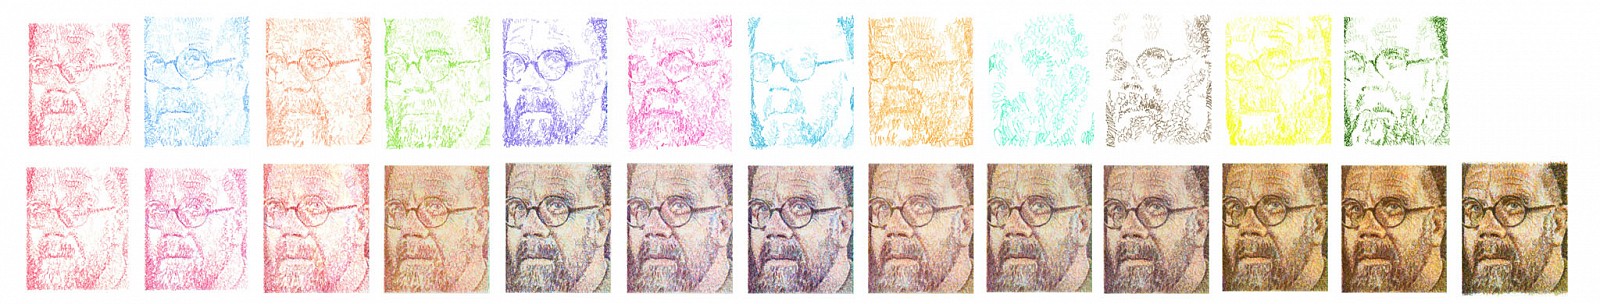 Chuck Close, Self-Portrait, Scribble, Etching Portfolio, 2000
Set of 25 Prints (12 One-Color Plate Proofs, 12 Progressive Proofs, One Final Signed), 19 3/4 x 16 3/4 inches (each)